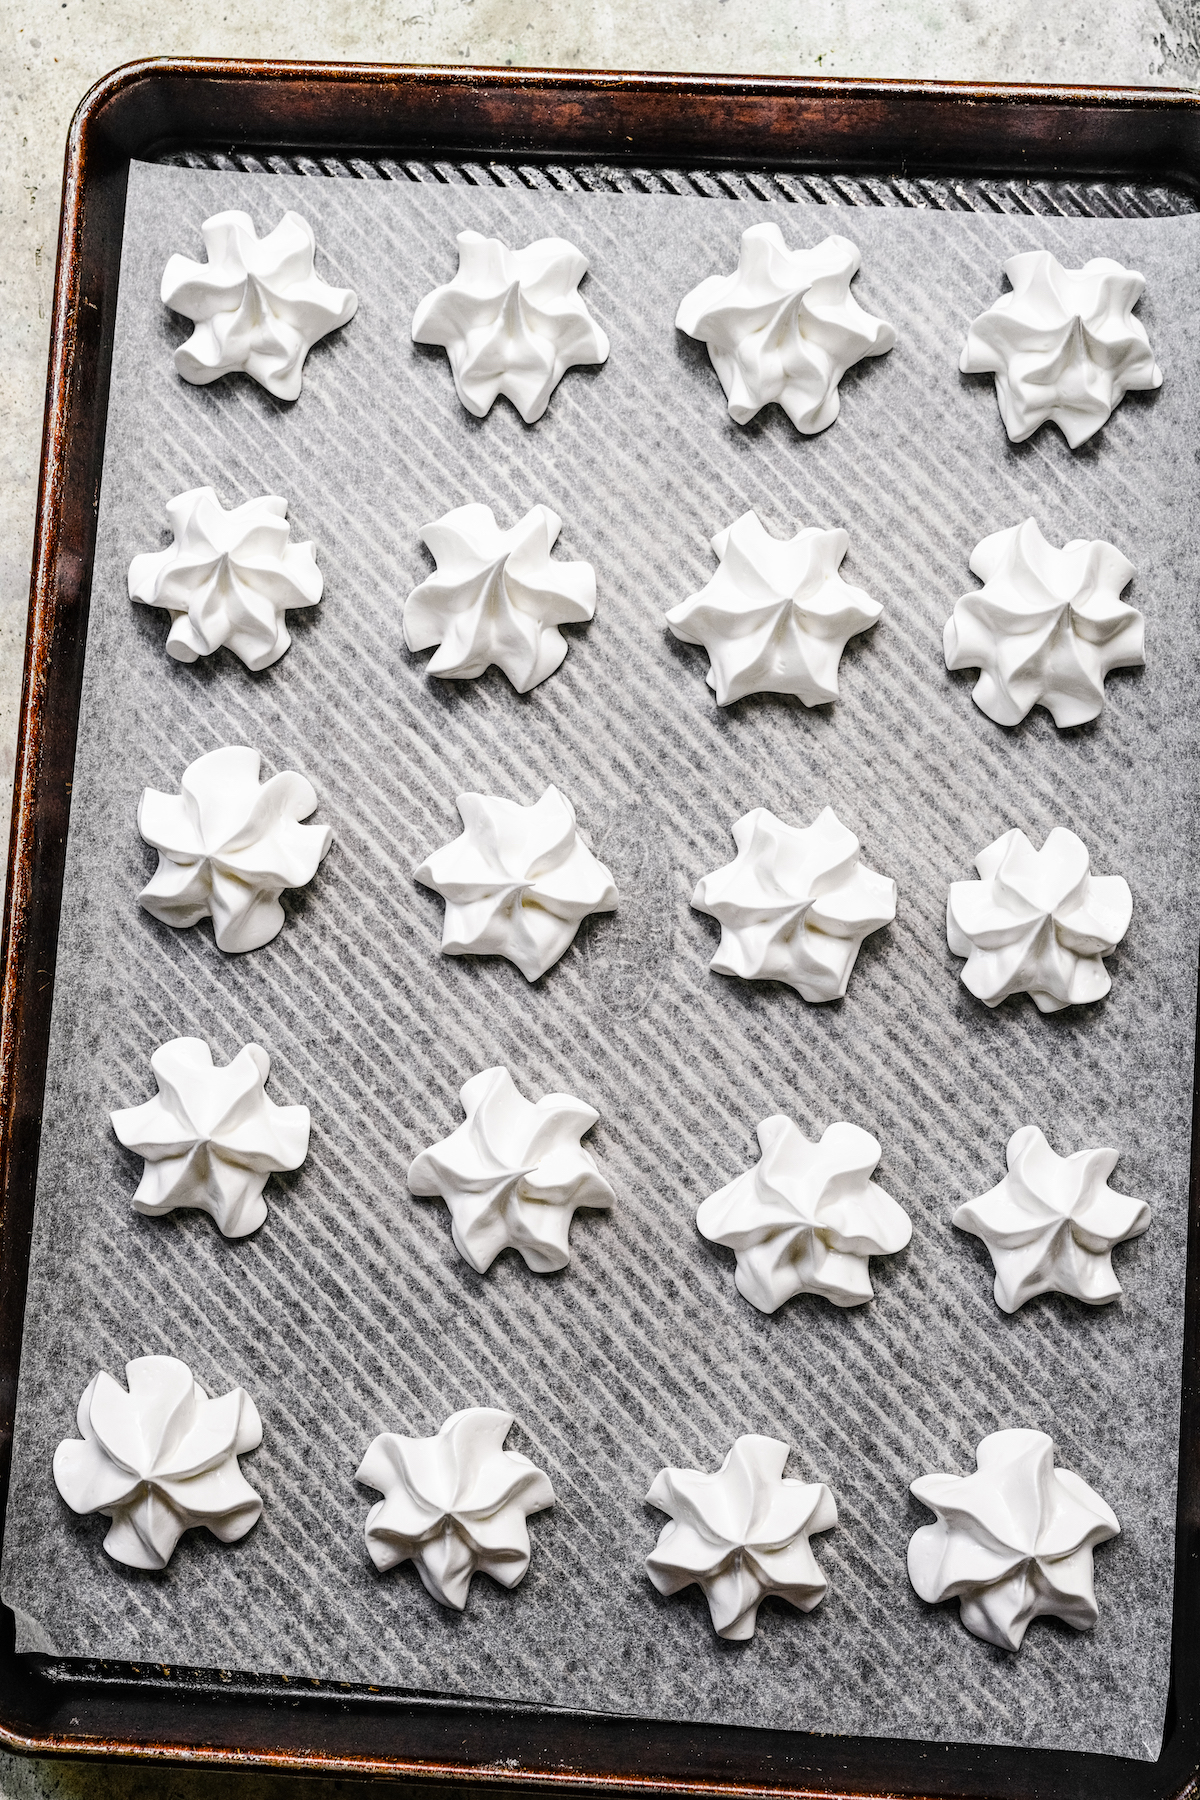 Piped meringues on a parchment-lined baking sheet.